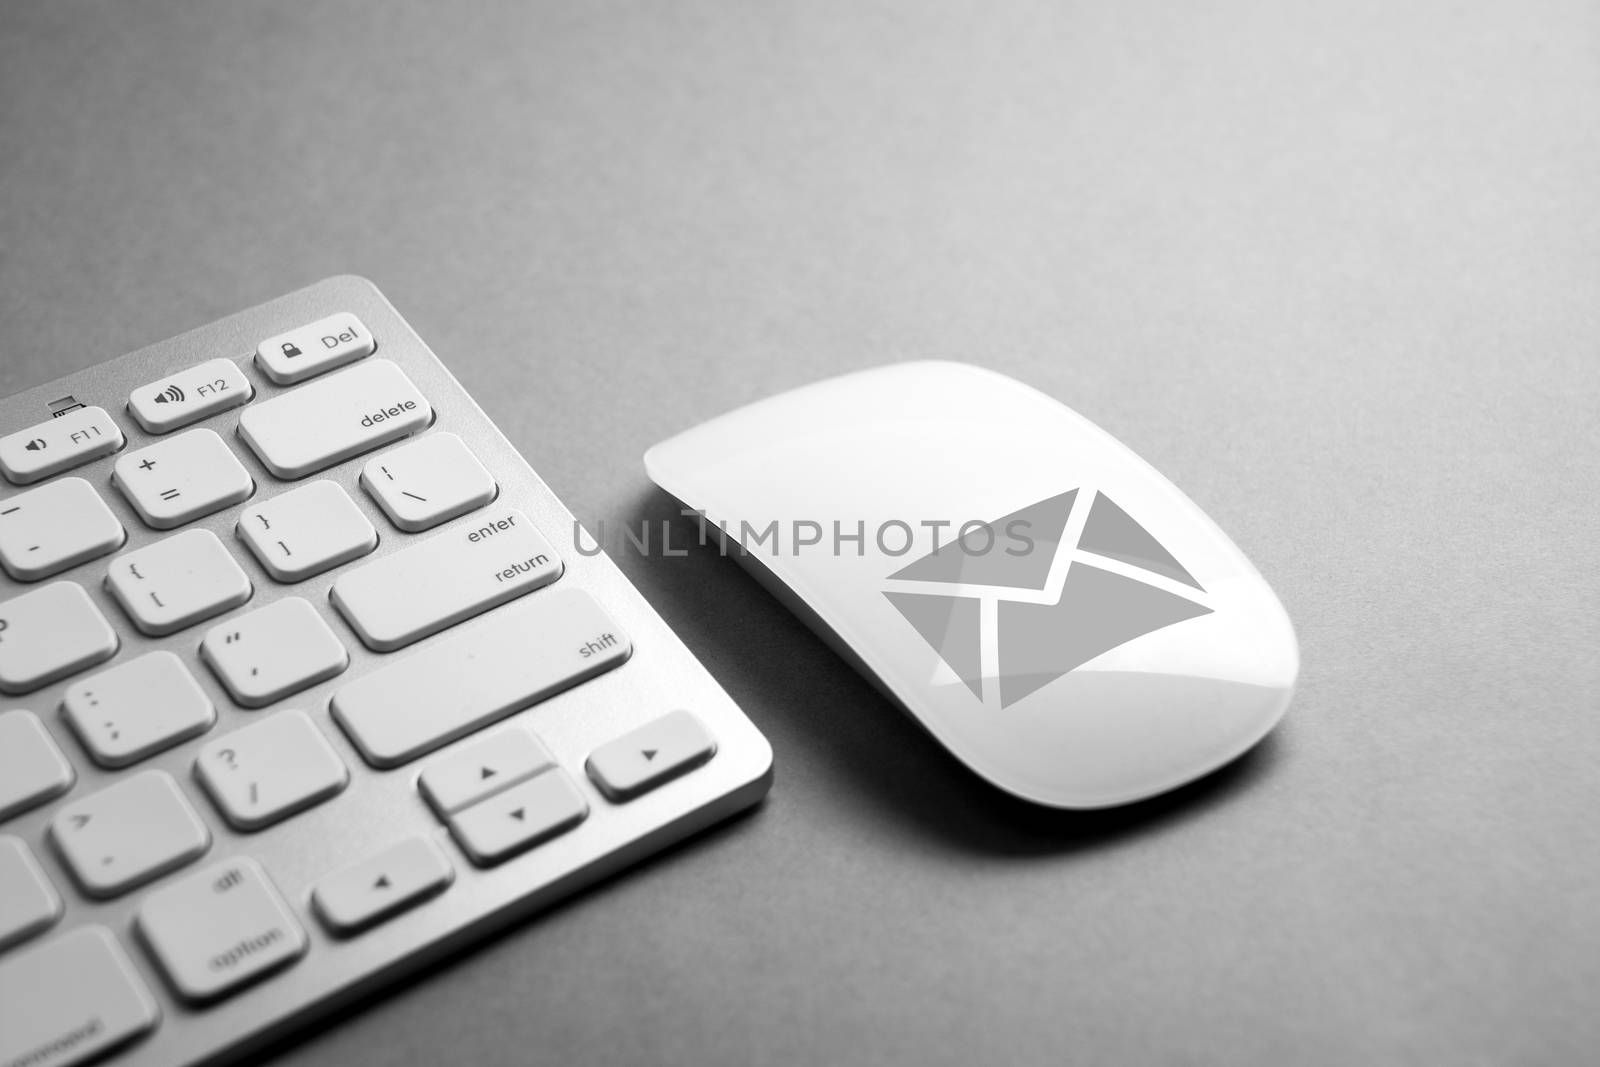 Email ,telephone, & contact us icon on computer mouse by Alicephoto